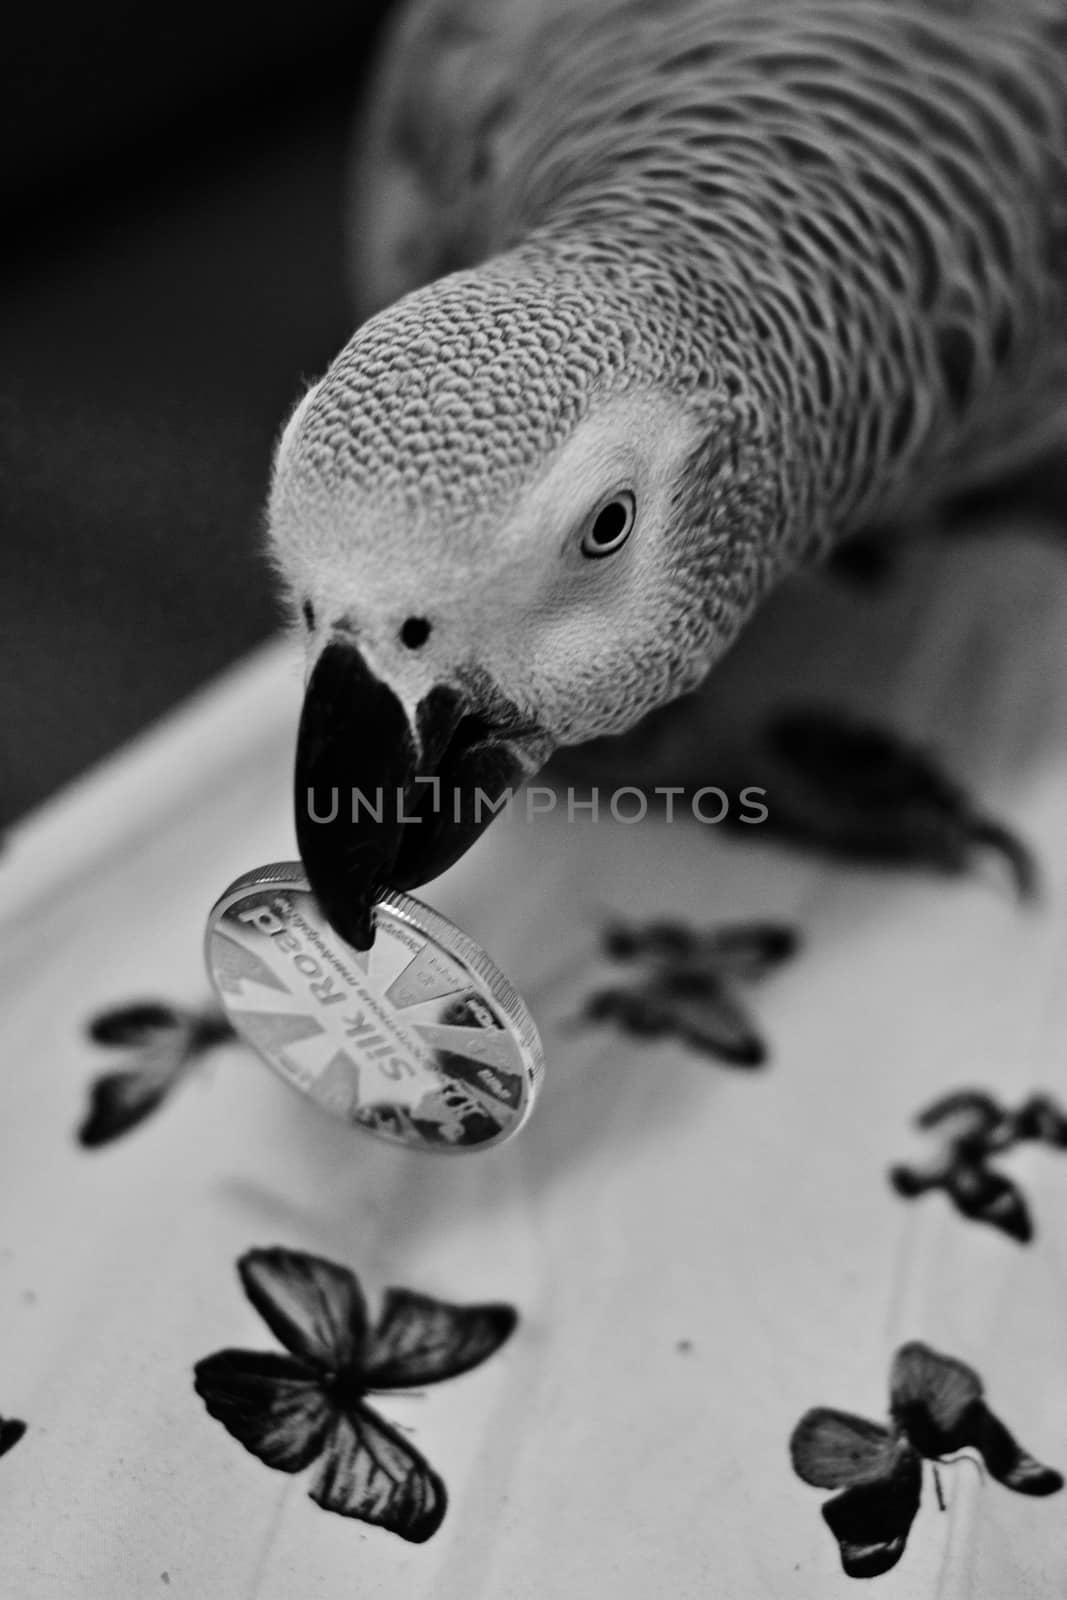 Small home pet. African gre parrot. Natural animal concept.